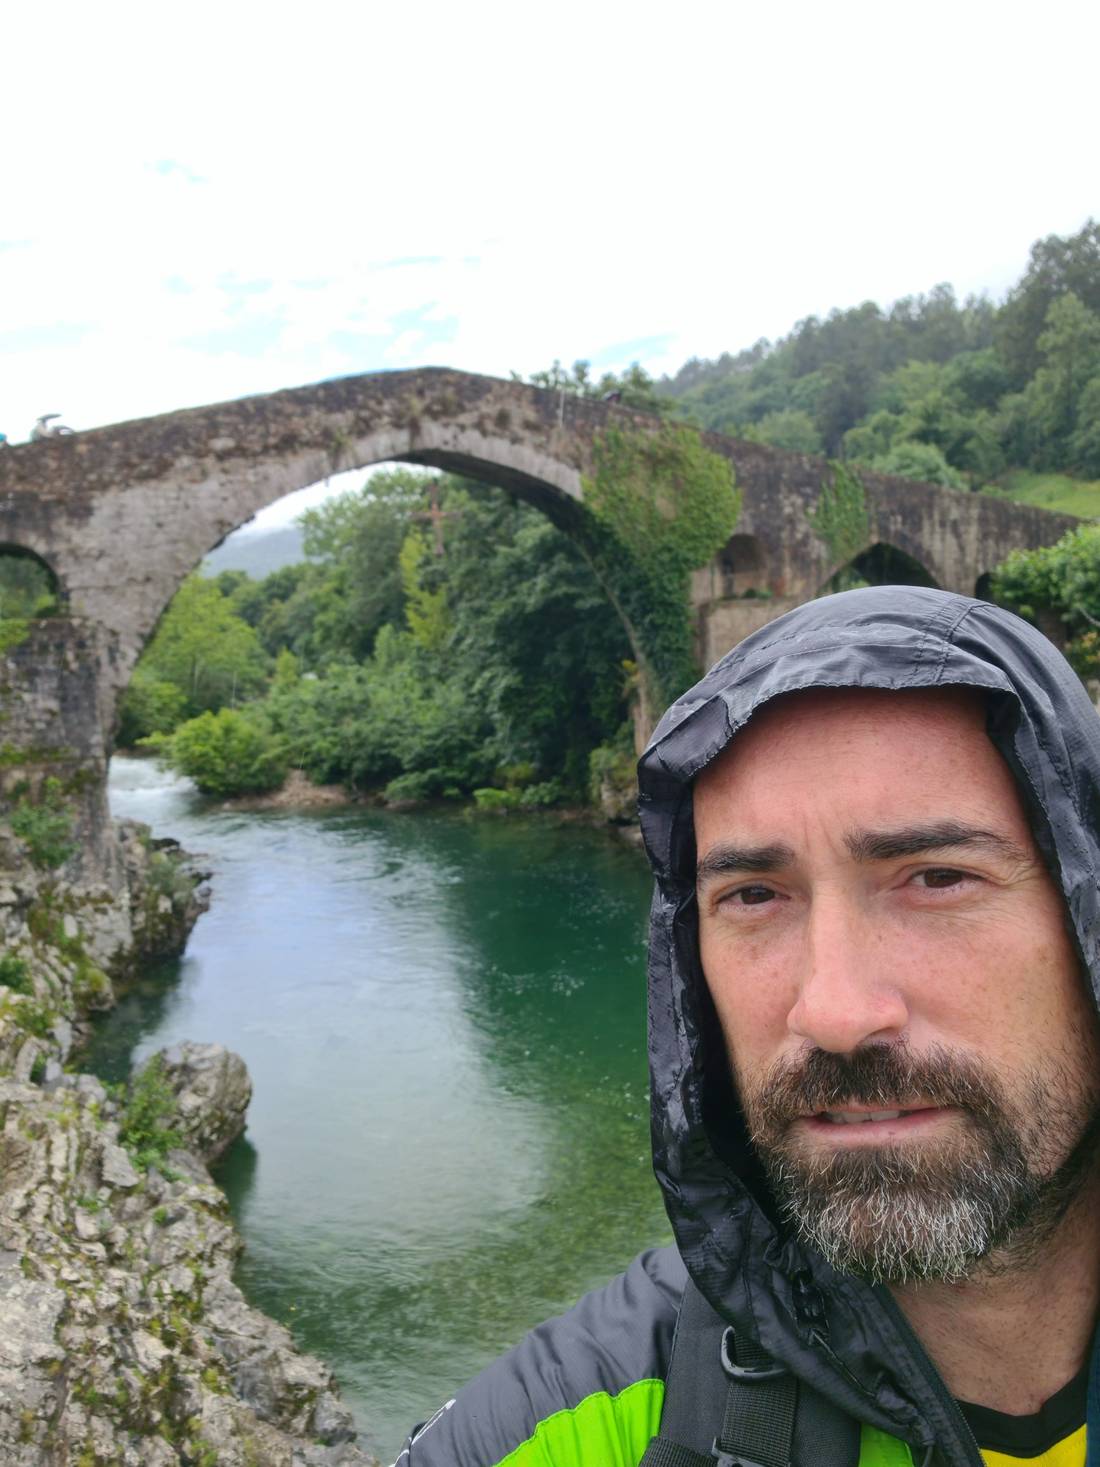 Roman Bridge (although its construction is of medieval origin and not Roman) and Victory Cross, over the Sella river (3).